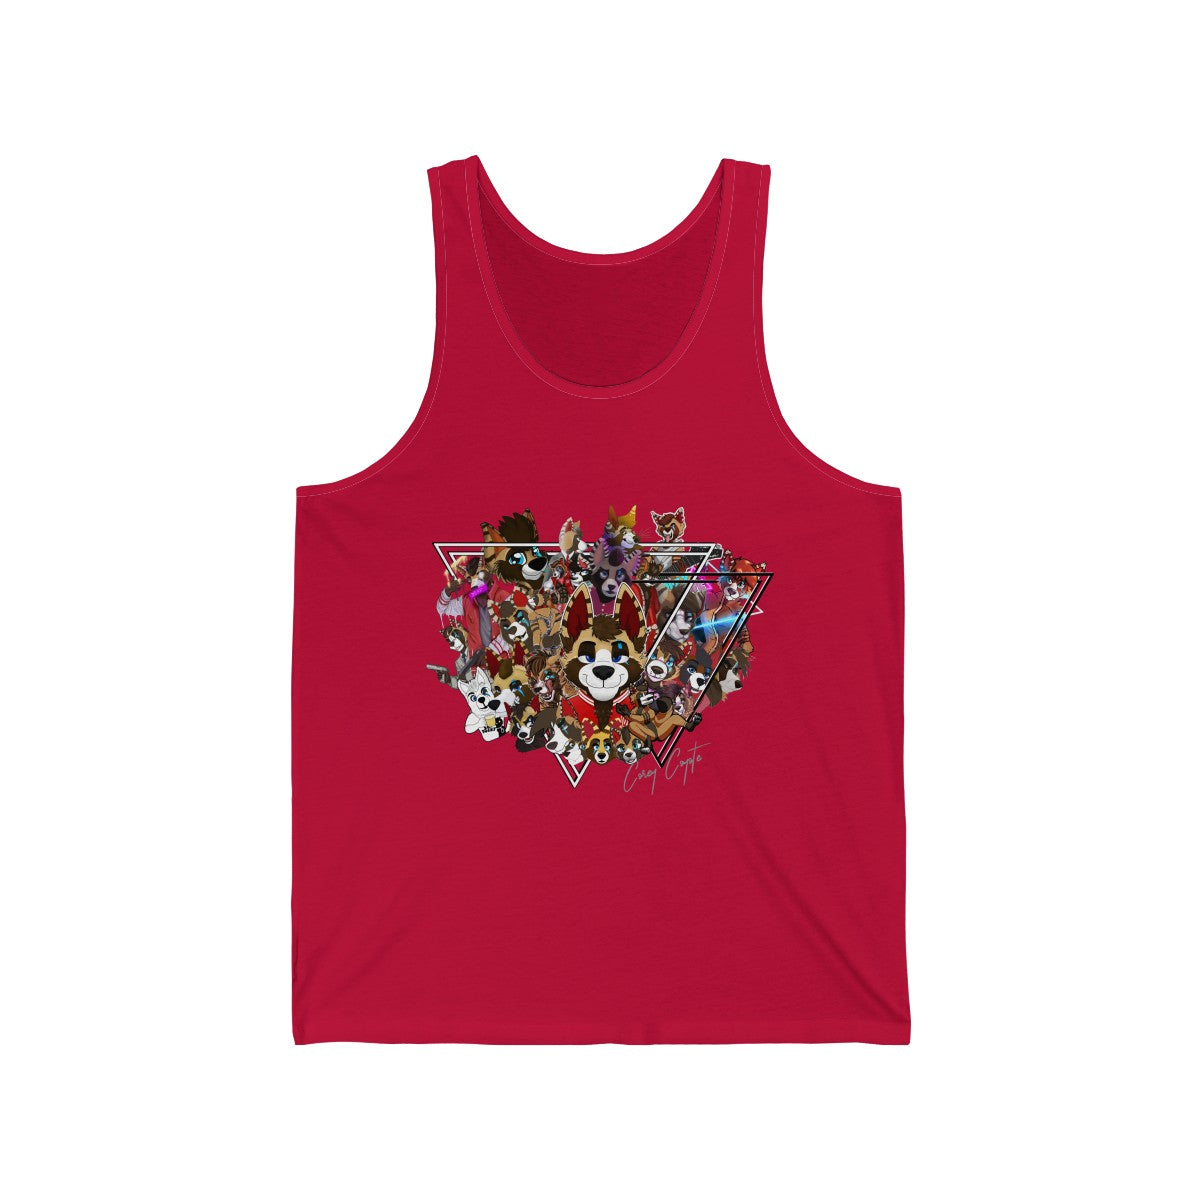 For The Fans - Tank Top Tank Top Corey Coyote Red XS 